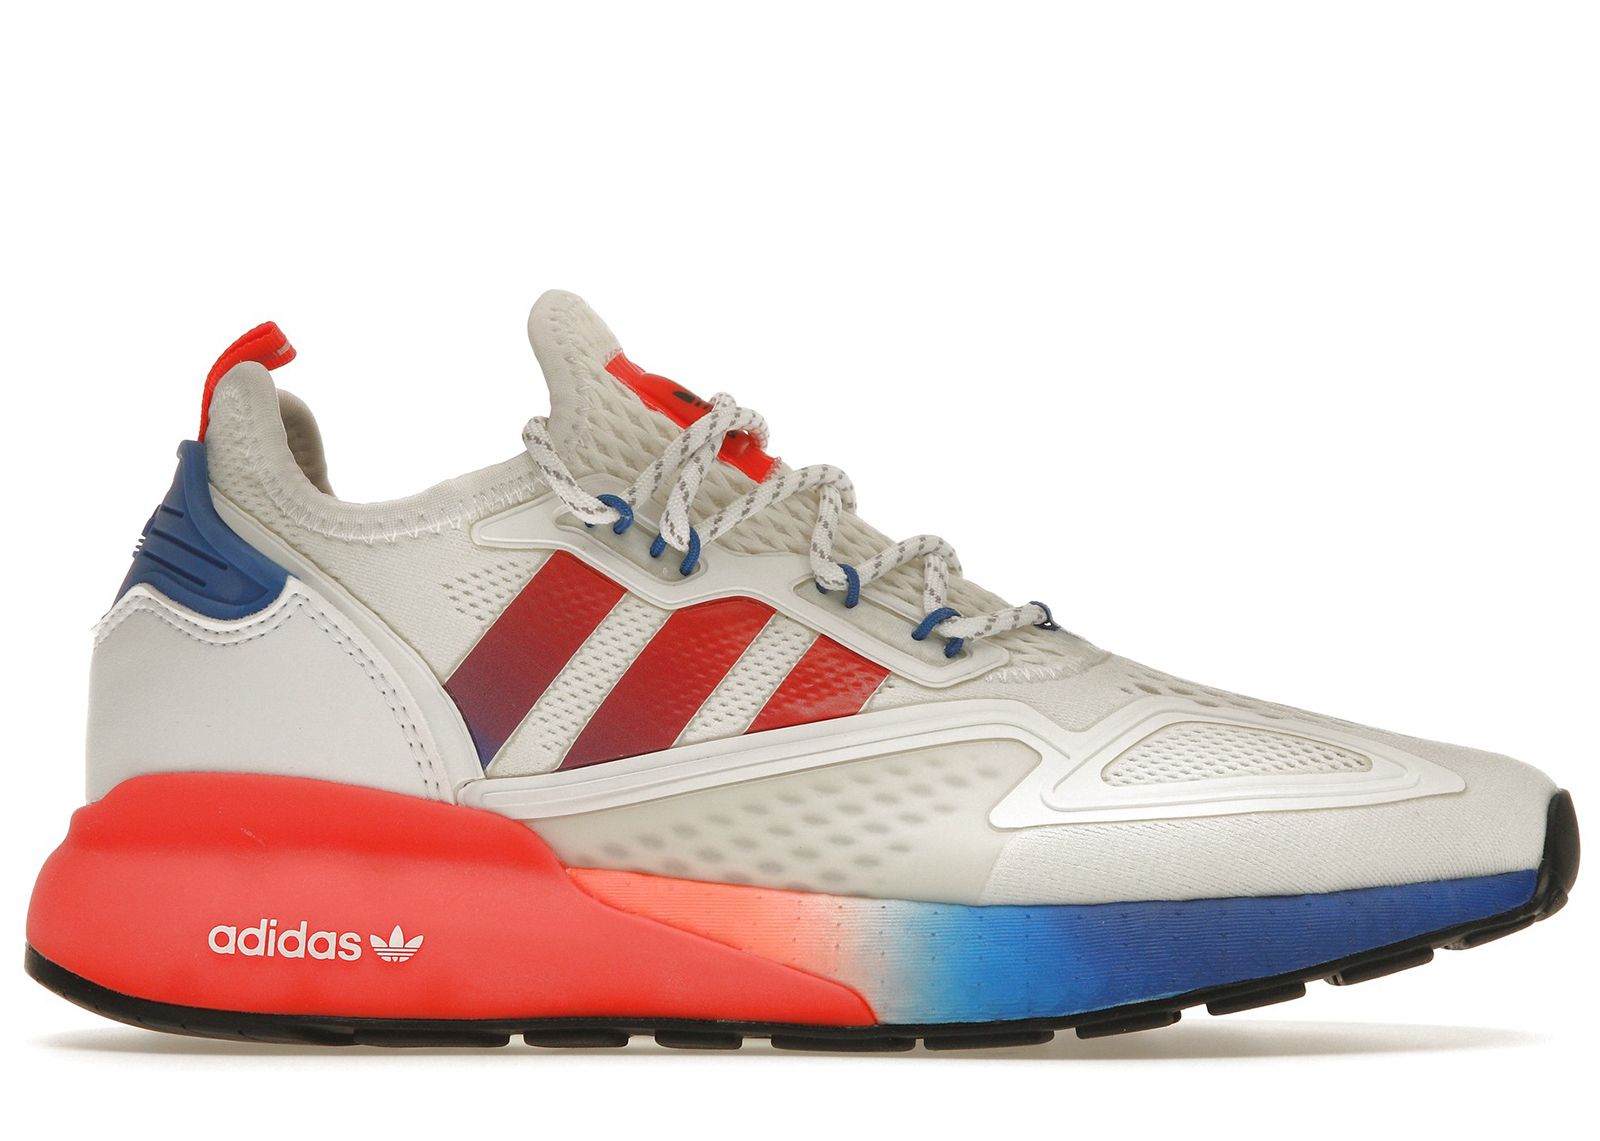 adidas ZX 2K Boost White Solar Red Blue